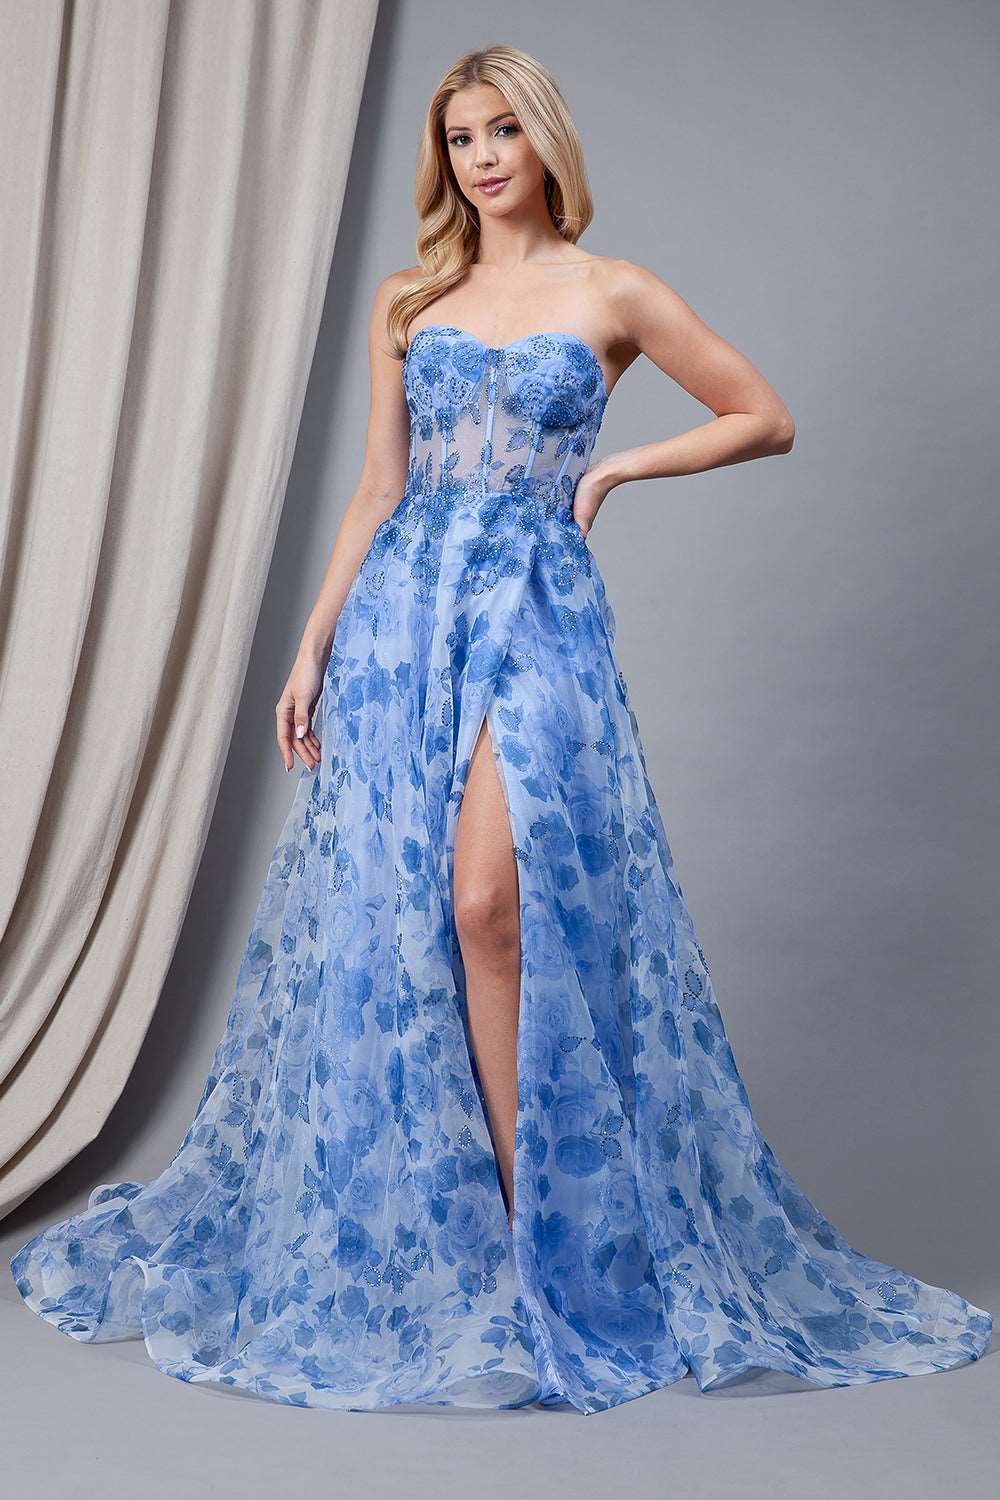 AC 2106 - Strapless A-Line Organza Print Prom Gown with Boned Corset Bodice Leg Slit & Open Corset Back Prom Dress Amelia Couture 2 BLUE 